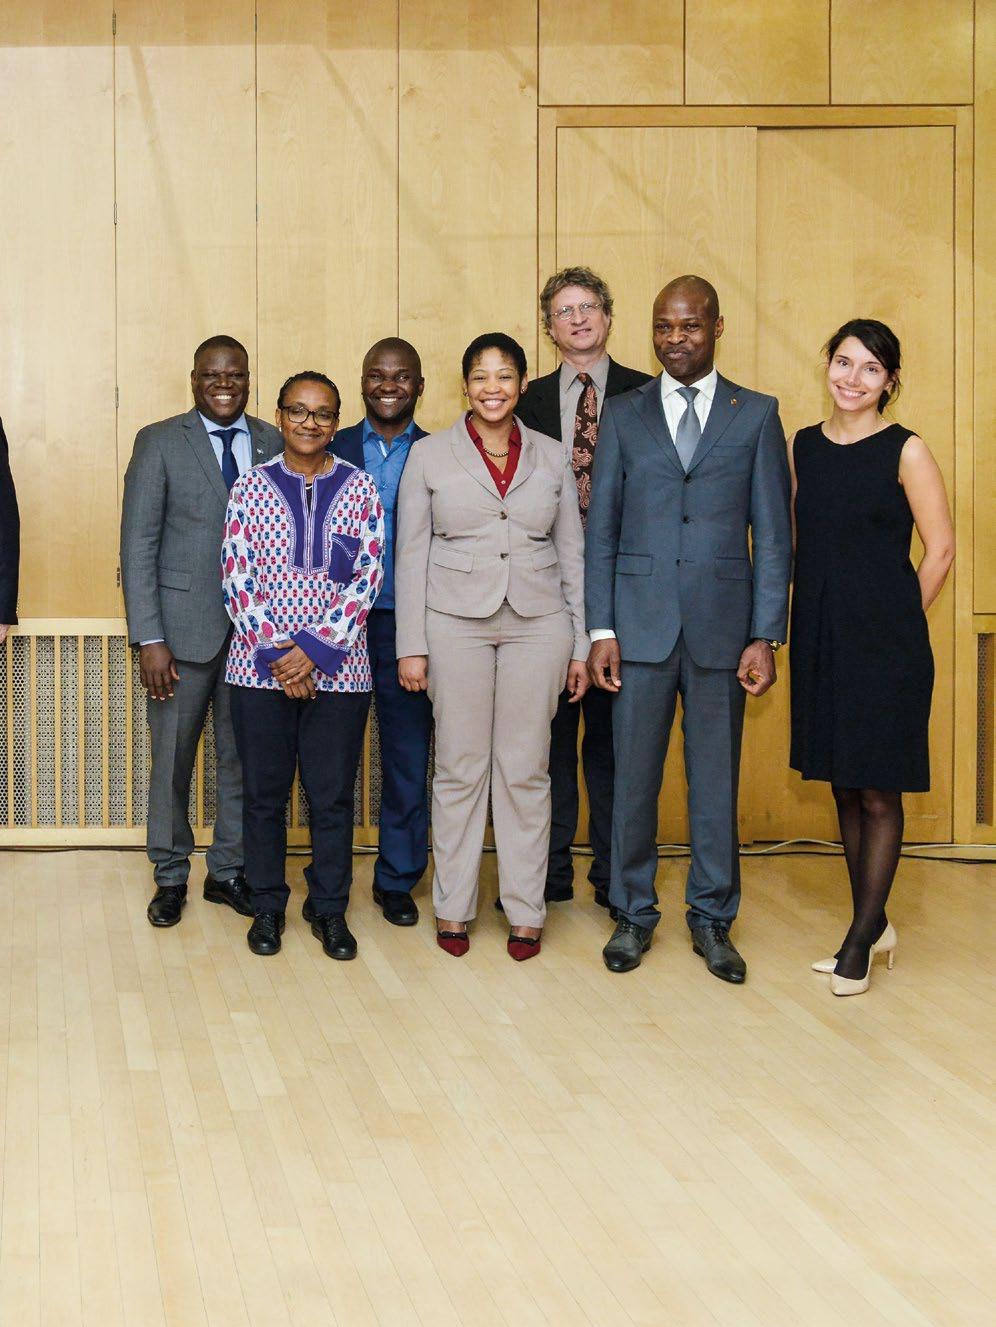 Executive Seminar for Diplomats from Africa 43 10 th Executive Seminar for Diplomats from Africa 8 September 1 December 2016 1 st row, from left to right: Helen Deacon (Programme Assistant), Michael